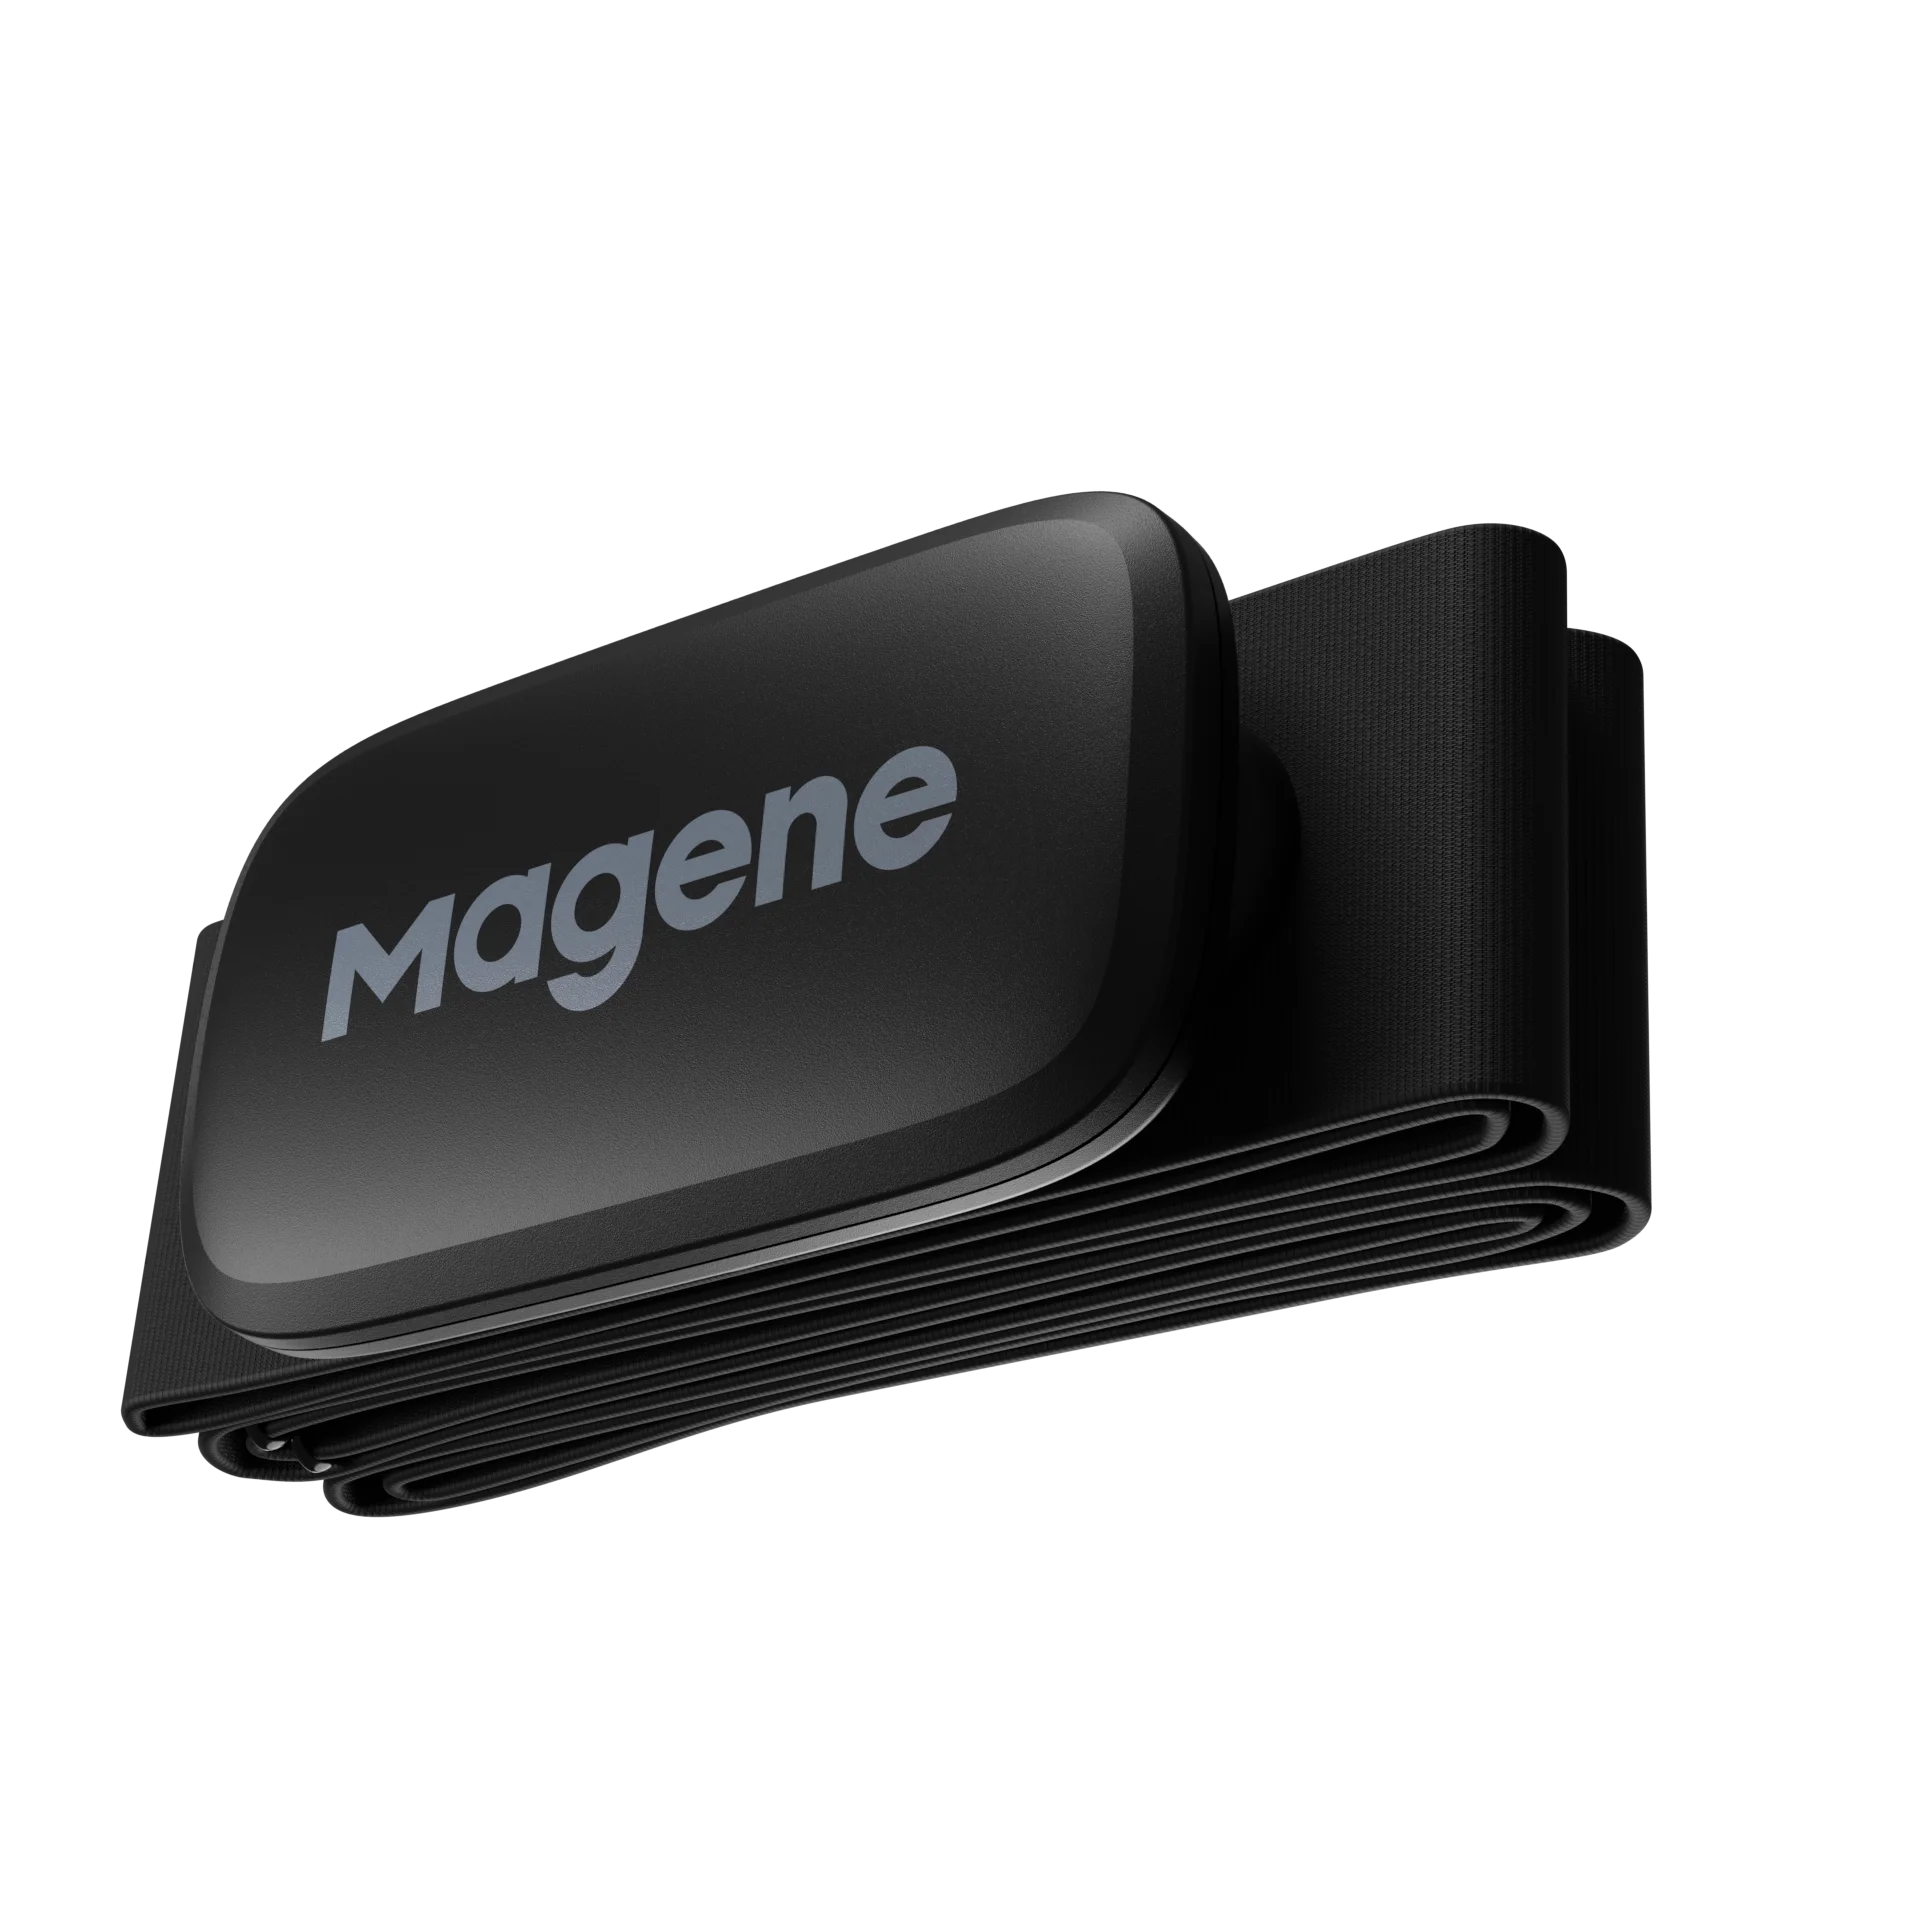 

Magene h64 heart Rate Sensor With Chest Strap